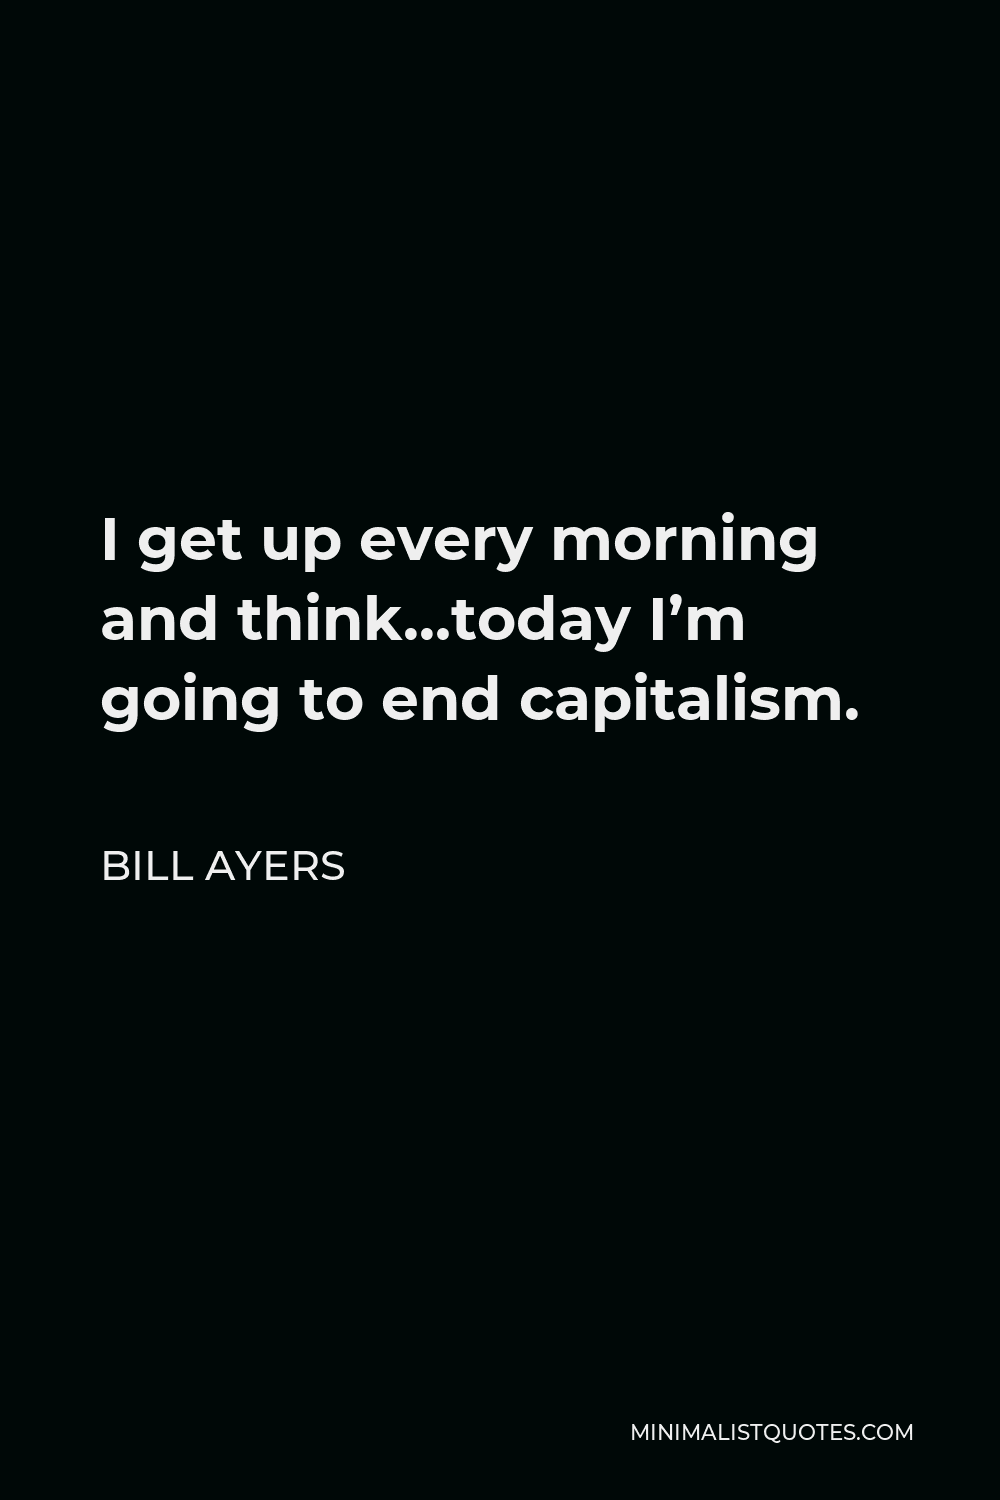 Bill Ayers Quote - I get up every morning and think, today I’m going to make a difference. Today I’m going to end capitalism. Today I’m going to make a revolution. I go to bed every night disappointed but I’m back to work tomorrow, and that’s the only way you can do it.